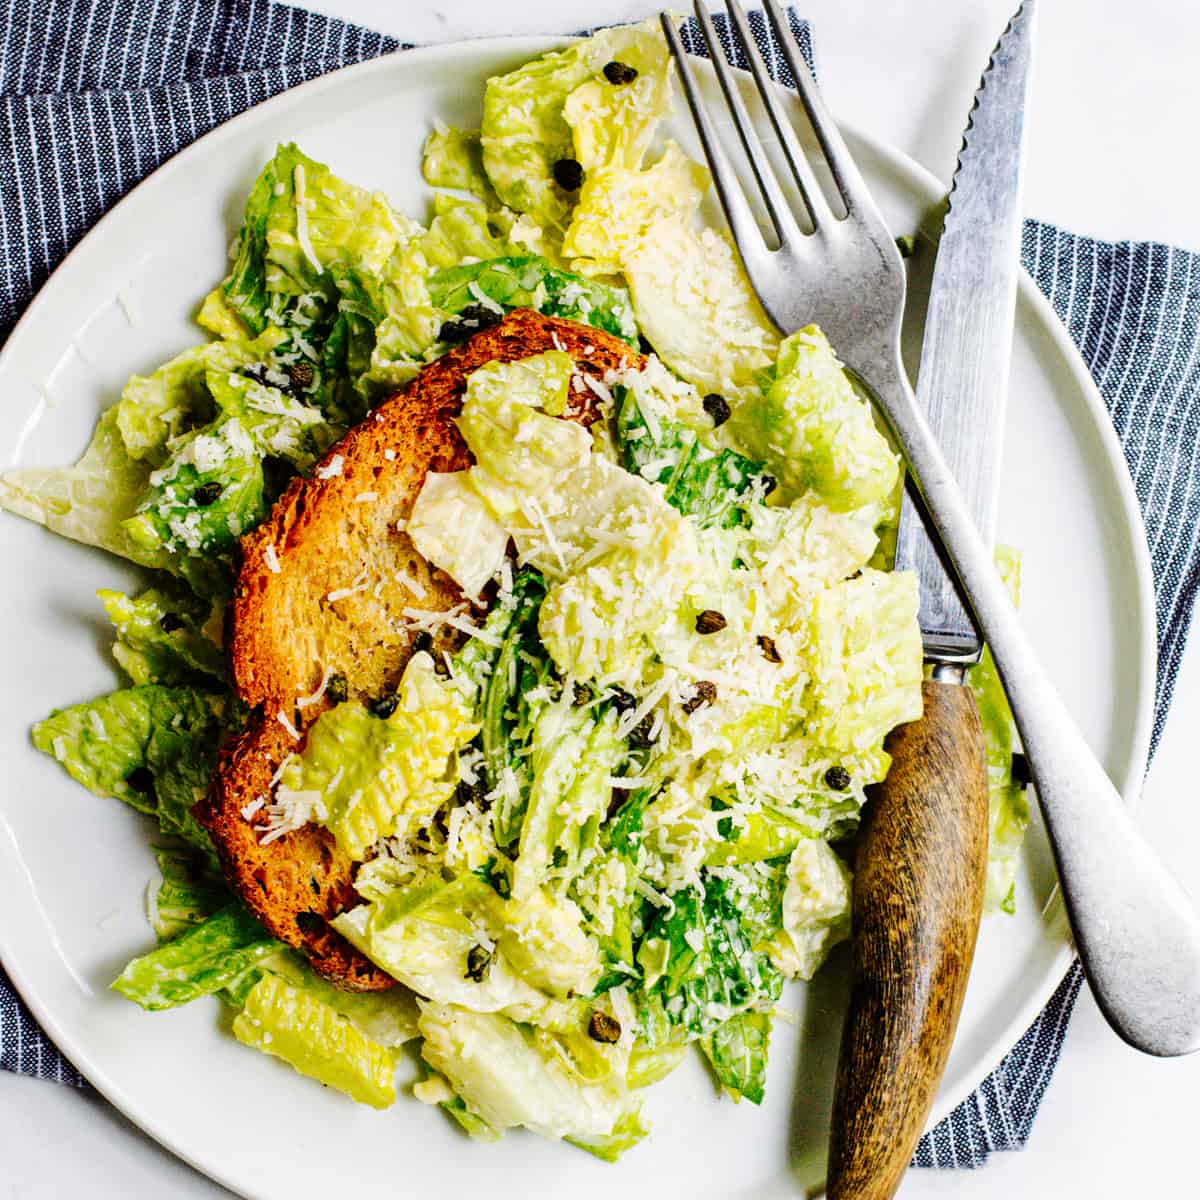 A plate of caesar salad with croutons and parmesan.